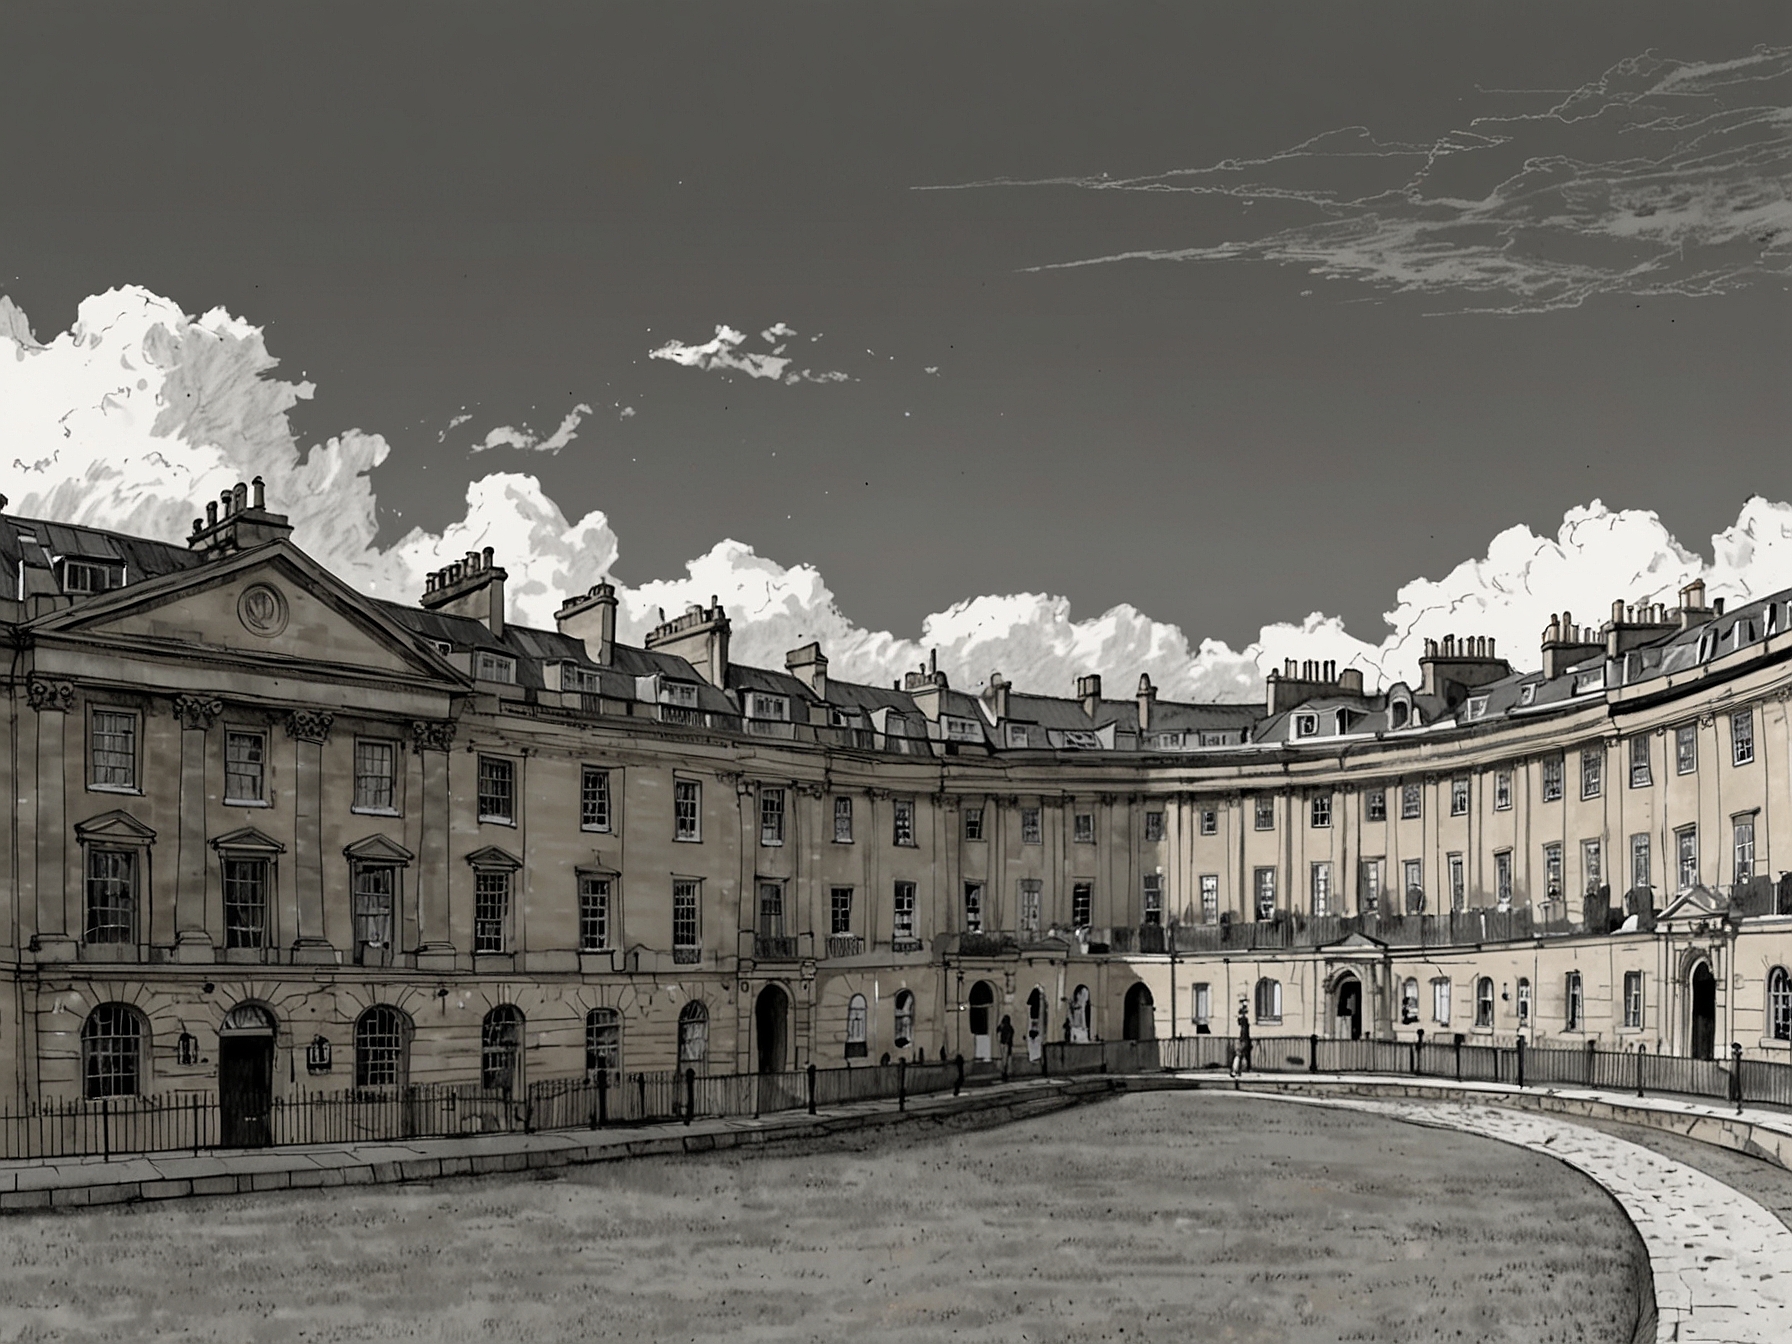 A picturesque view of Bath's iconic Georgian architecture with the Royal Crescent in the background, showcasing the city's historic charm and beautifully preserved buildings.